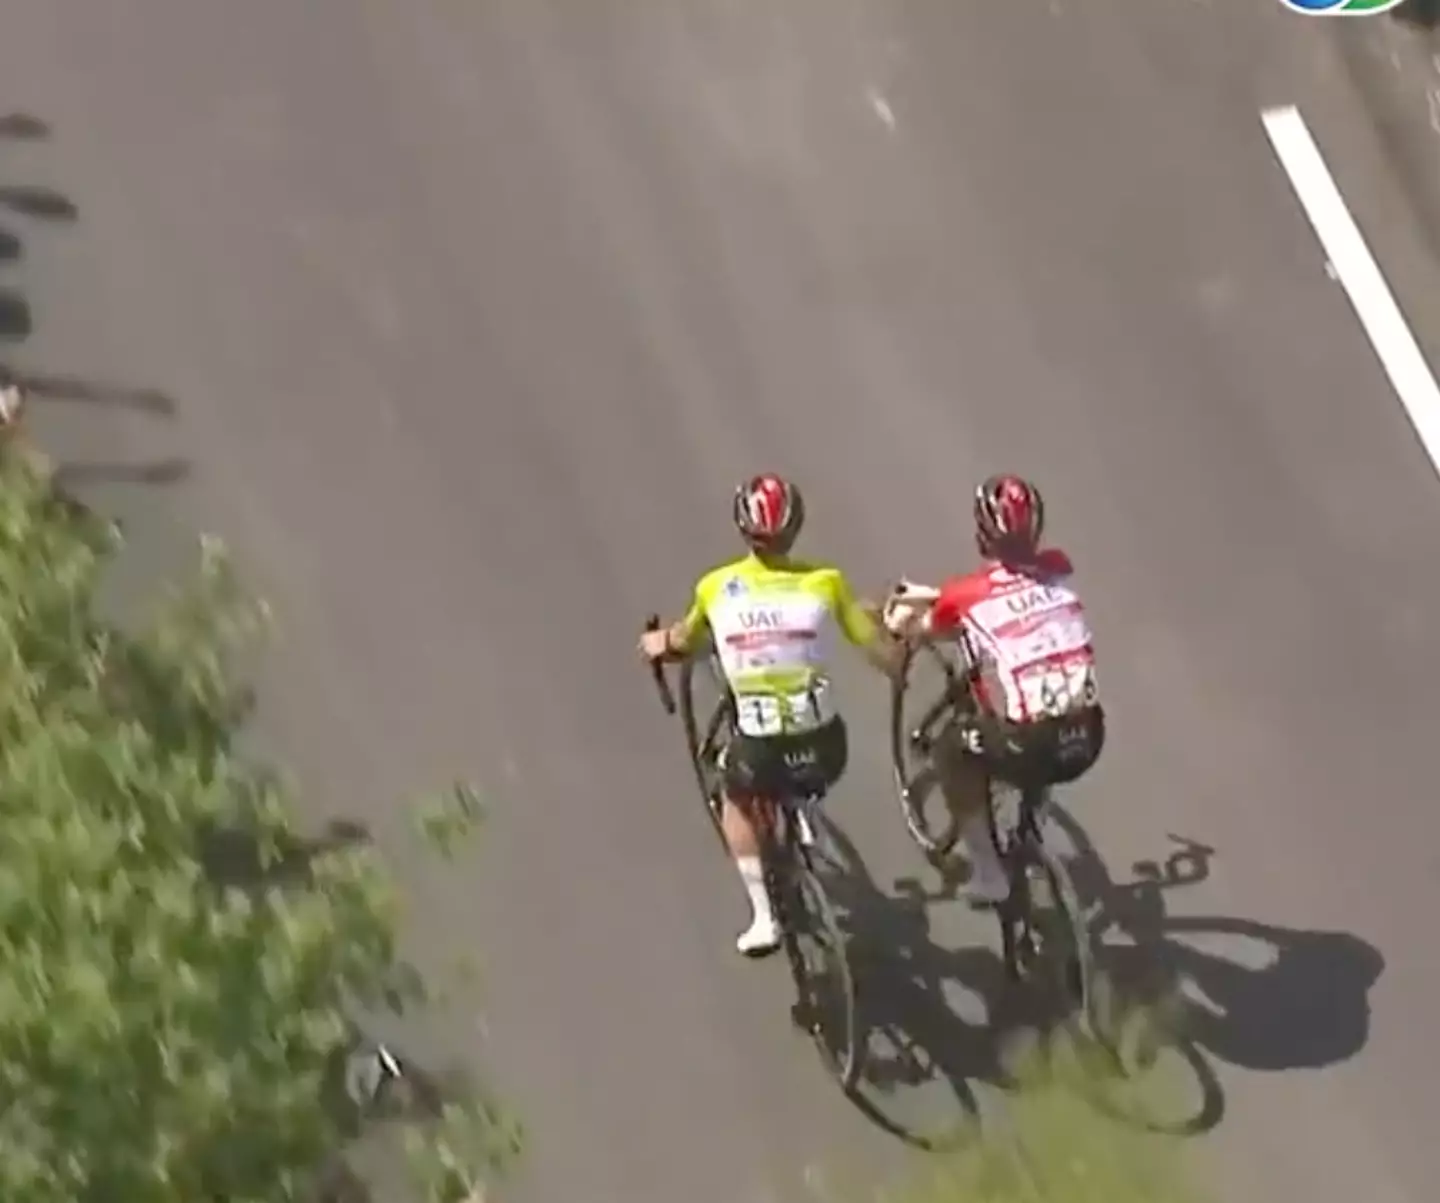 Two cyclists decided to show off their incredible sportsmanship.